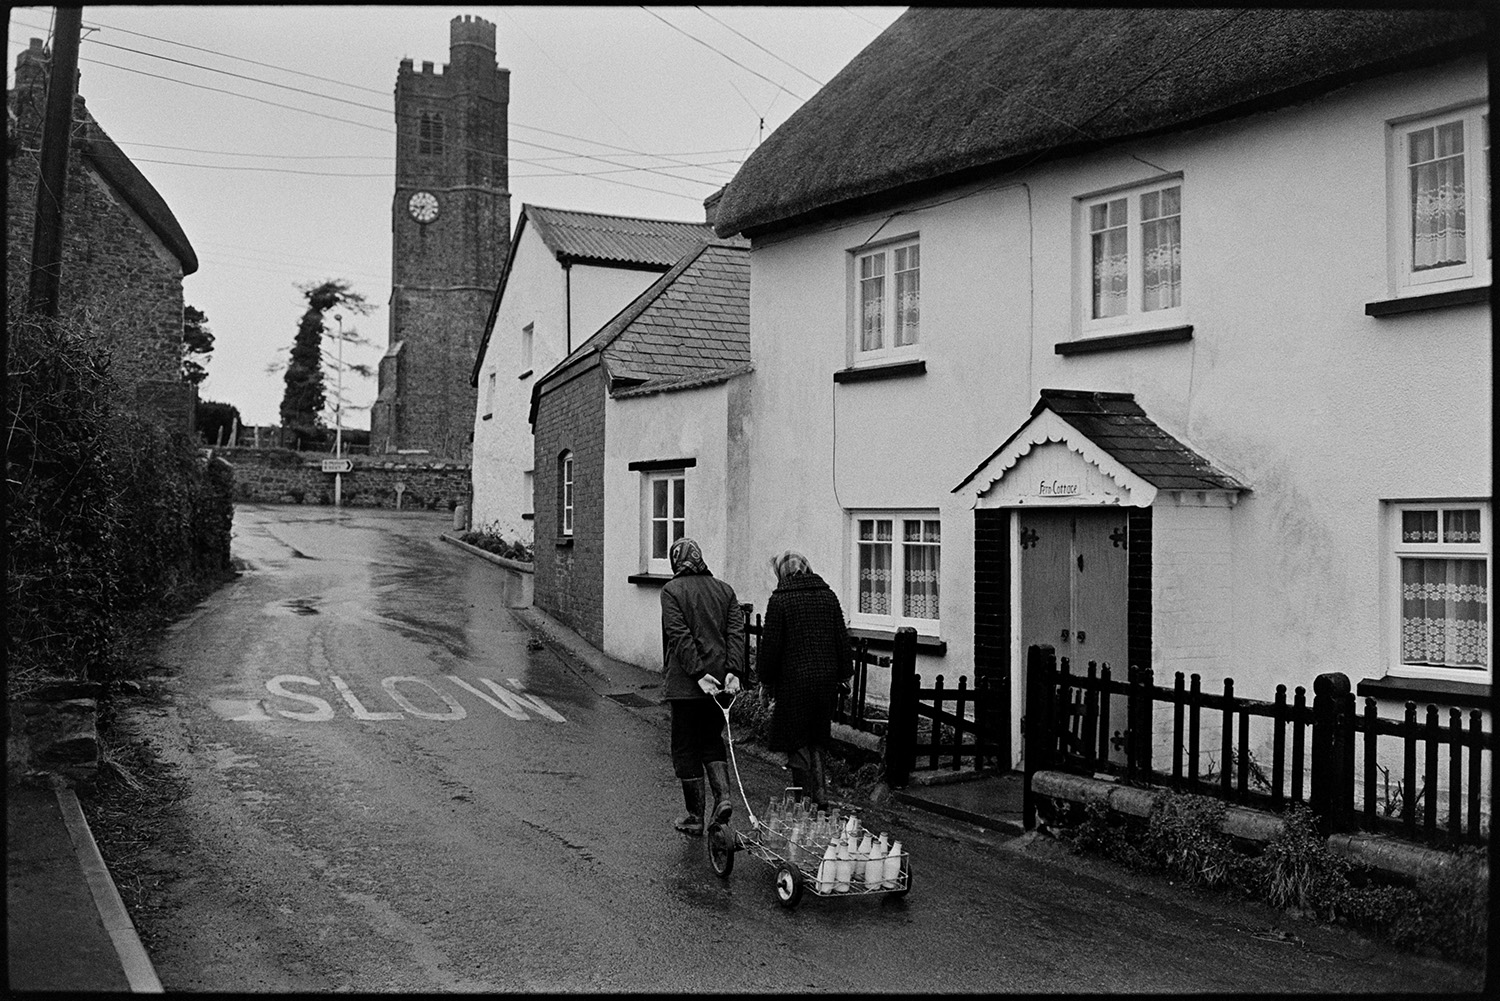 Woman delivering milk round village. <br />
[Jane Woolacott delivering milk to houses in Atherington. She is pulling a trolley with the milk bottles. Another woman is walking with her past Fern Cottage toward Atherington church tower.]